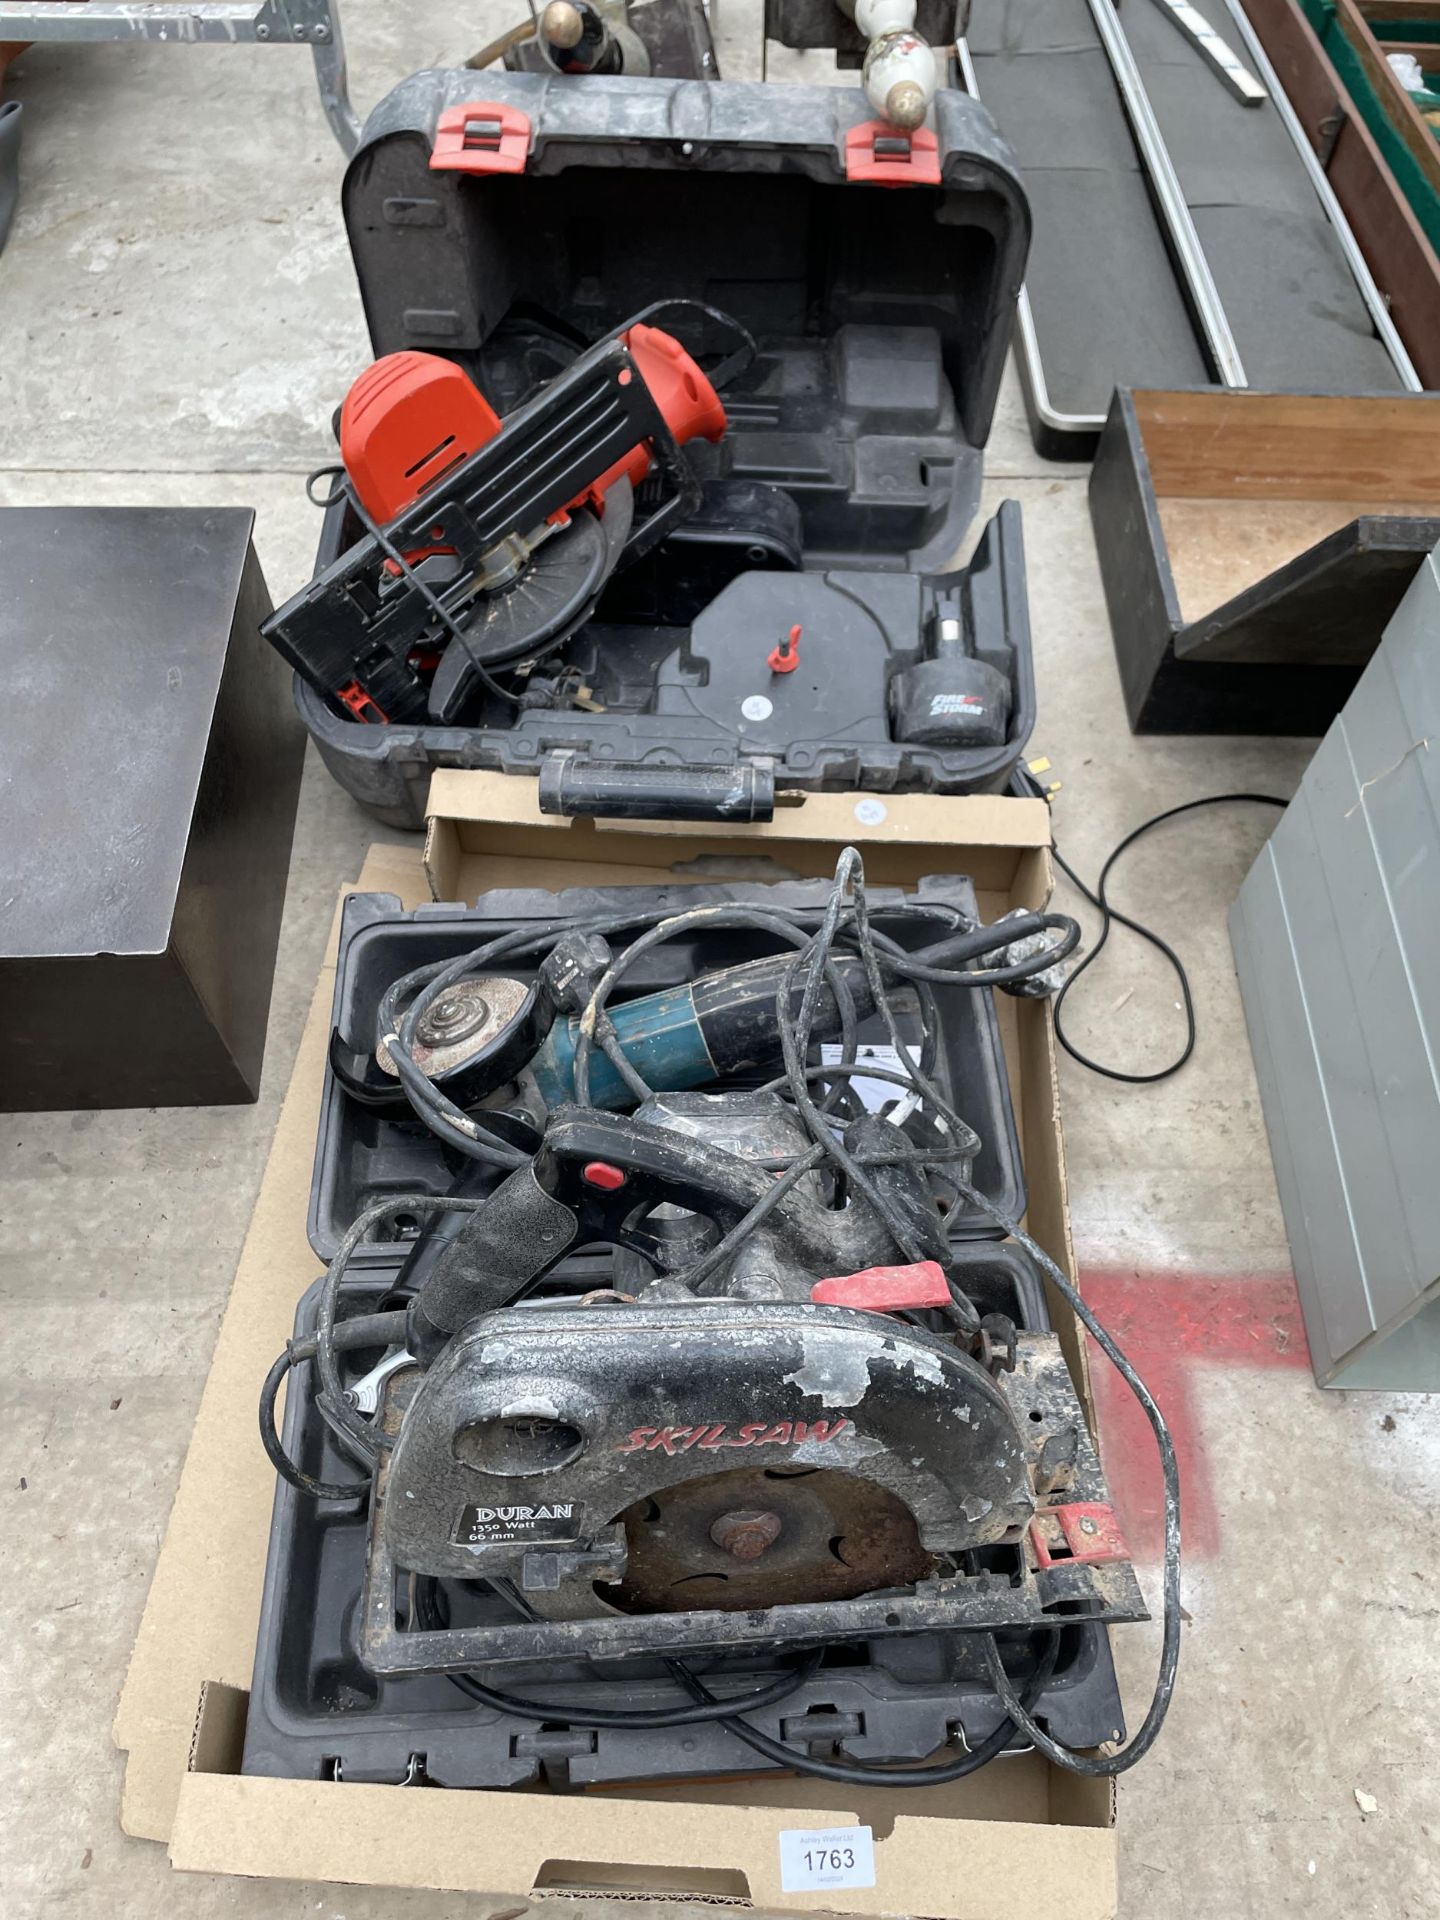 AN ASSORTMENT OF POWER TOOLS TO INCLUDE A SKILSAW RIP SAW AND A MAKITA ANGLE GRINDER ETC